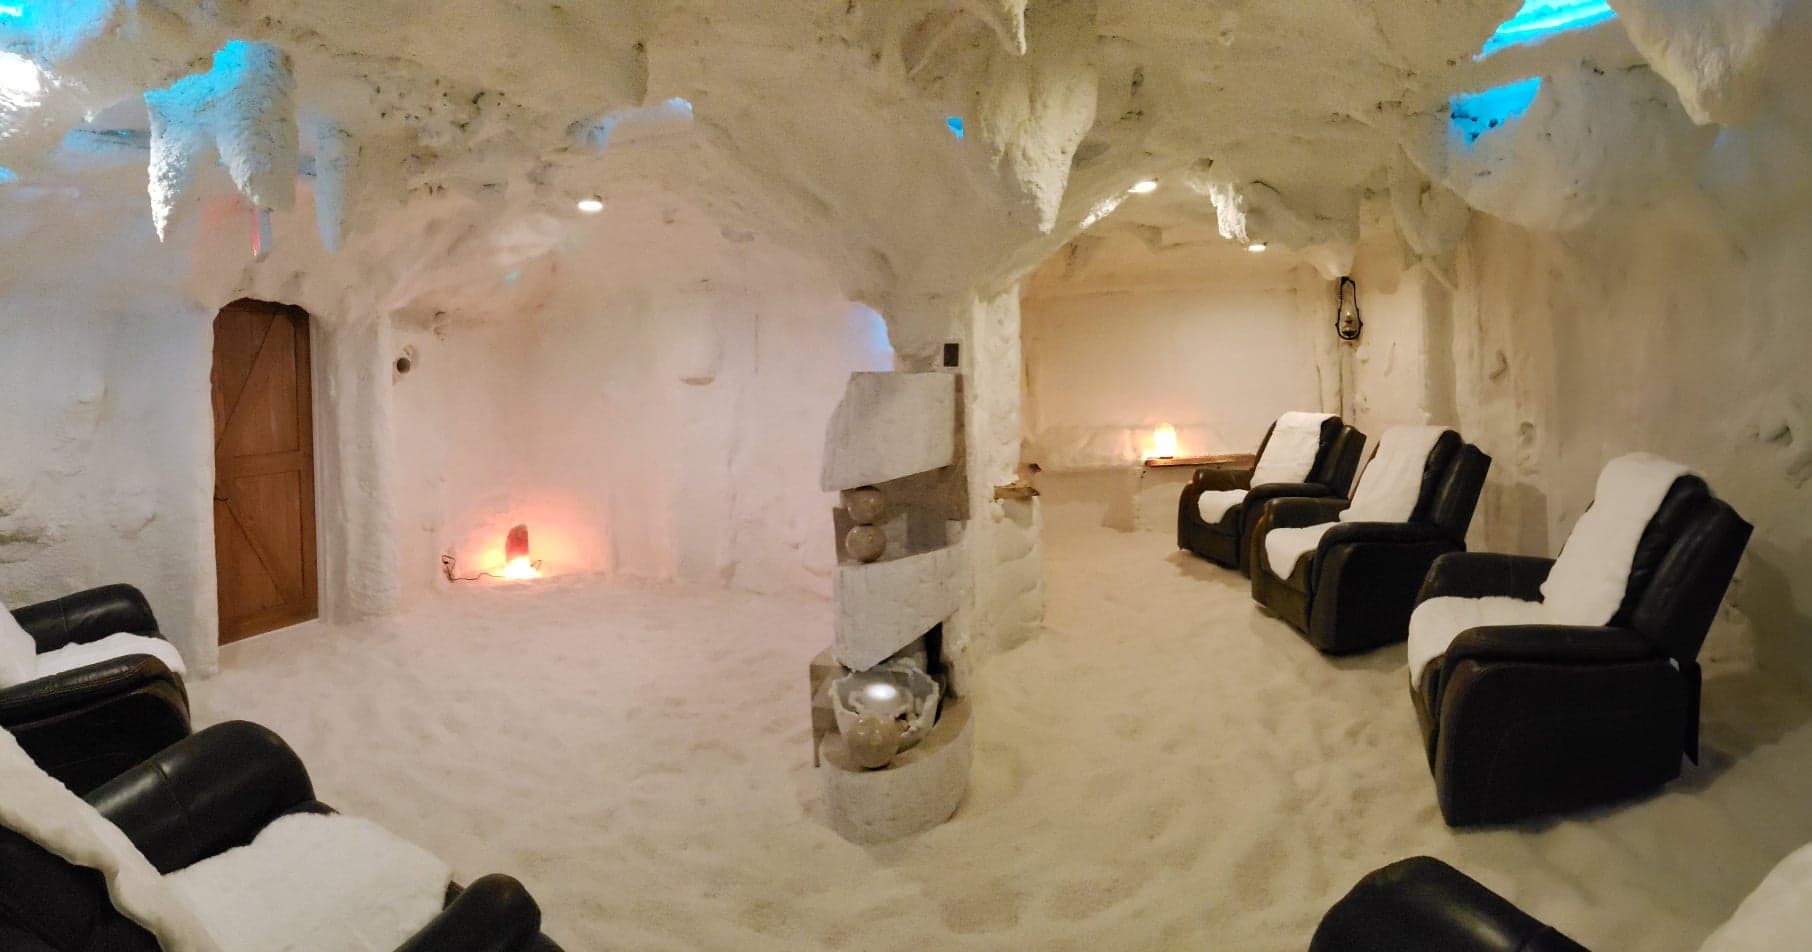 A Salt Room With White Salt On The Floor And Walls To Make It Look Like A Salt Cave